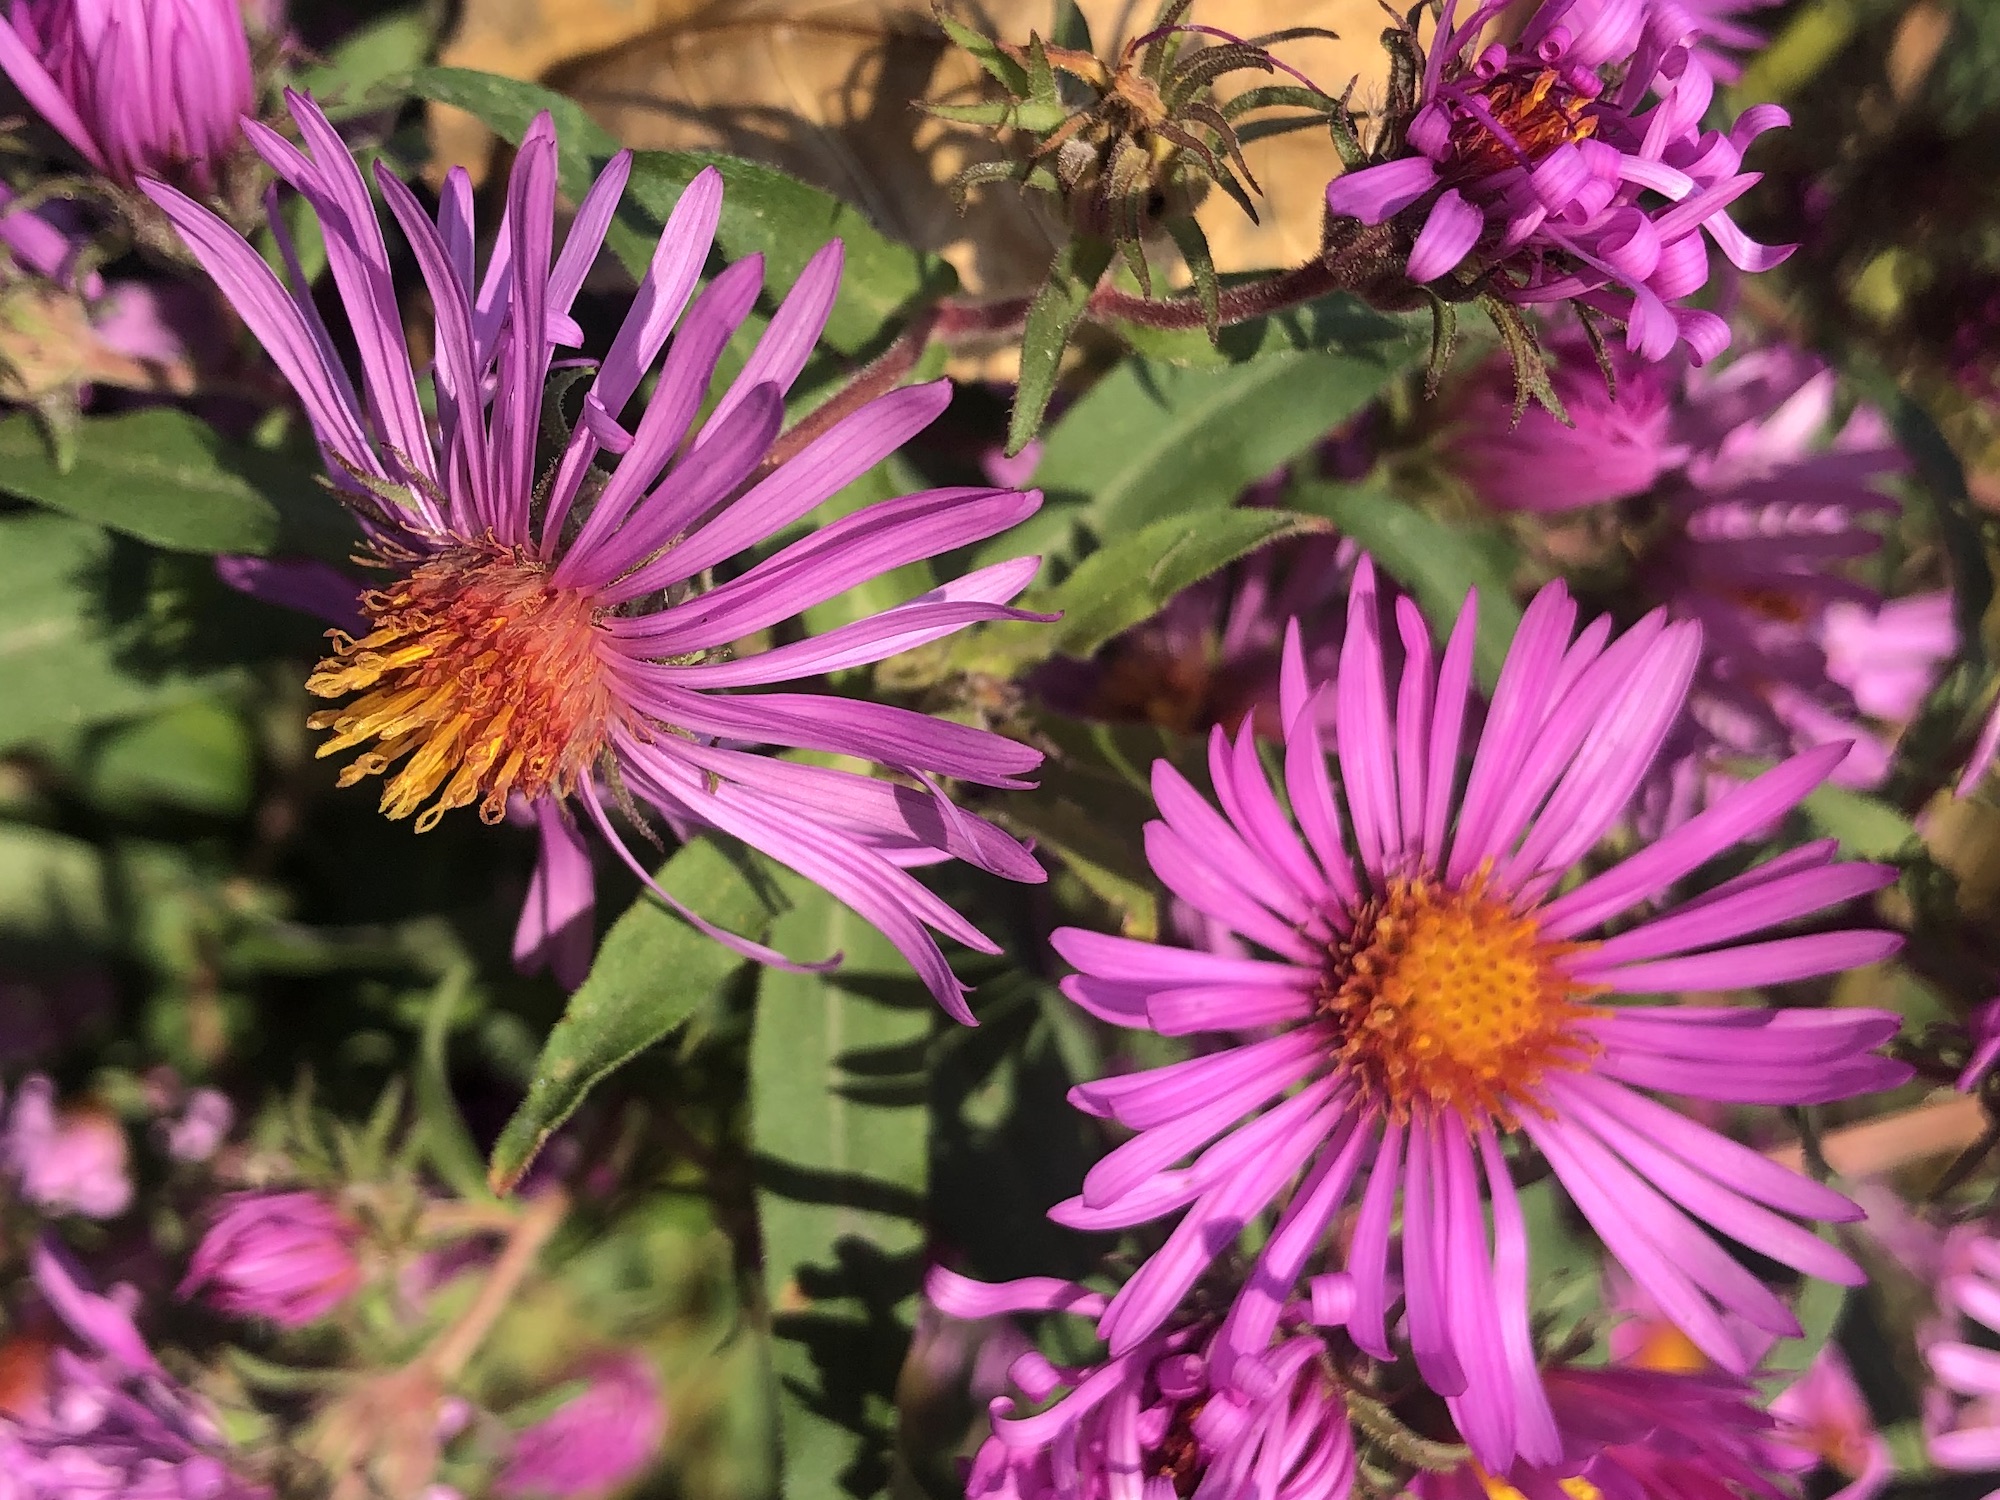 New England Aster on the bike path behind Gregory Street in Madison, Wisconsin on October 23, 2022.